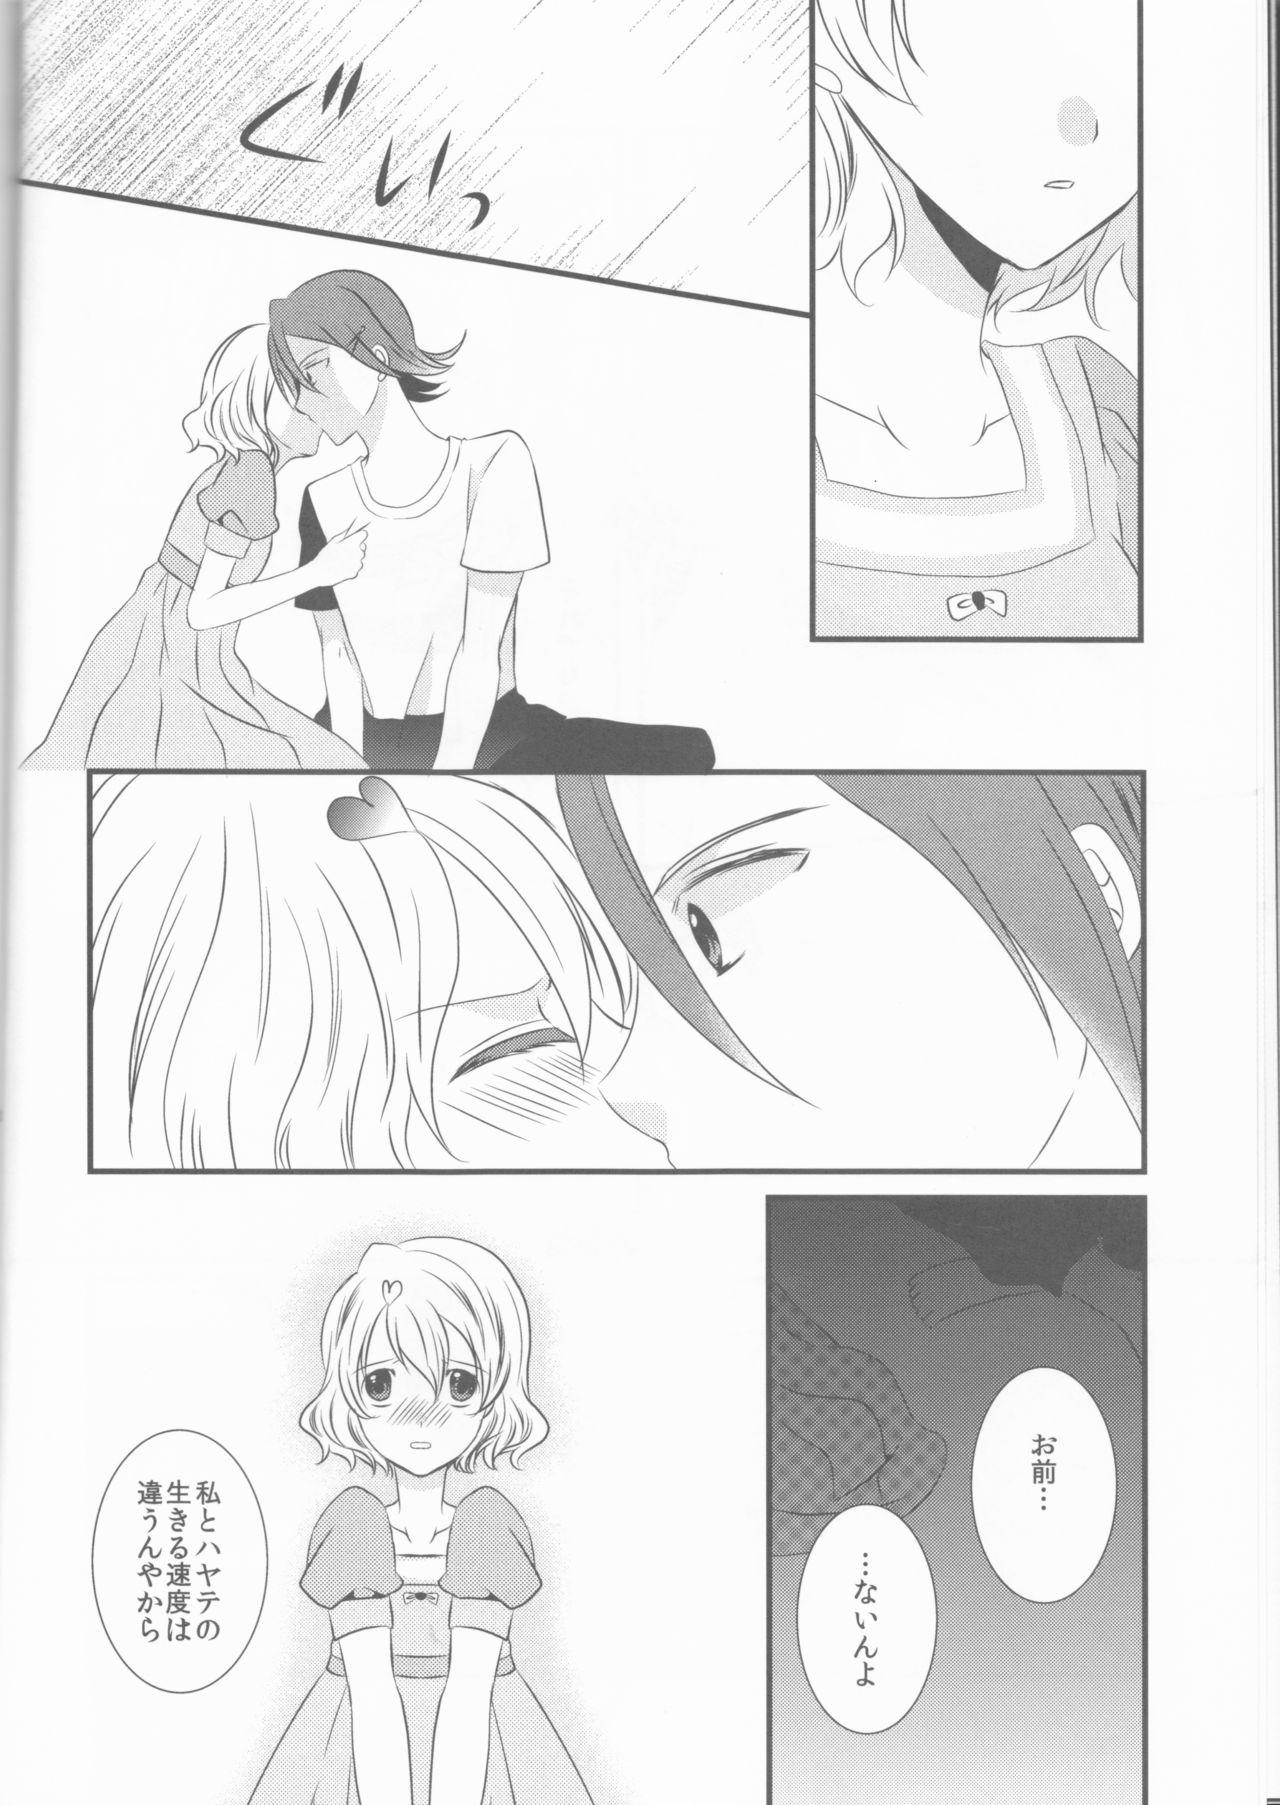 Asiansex one's love - Macross delta Fist - Page 7